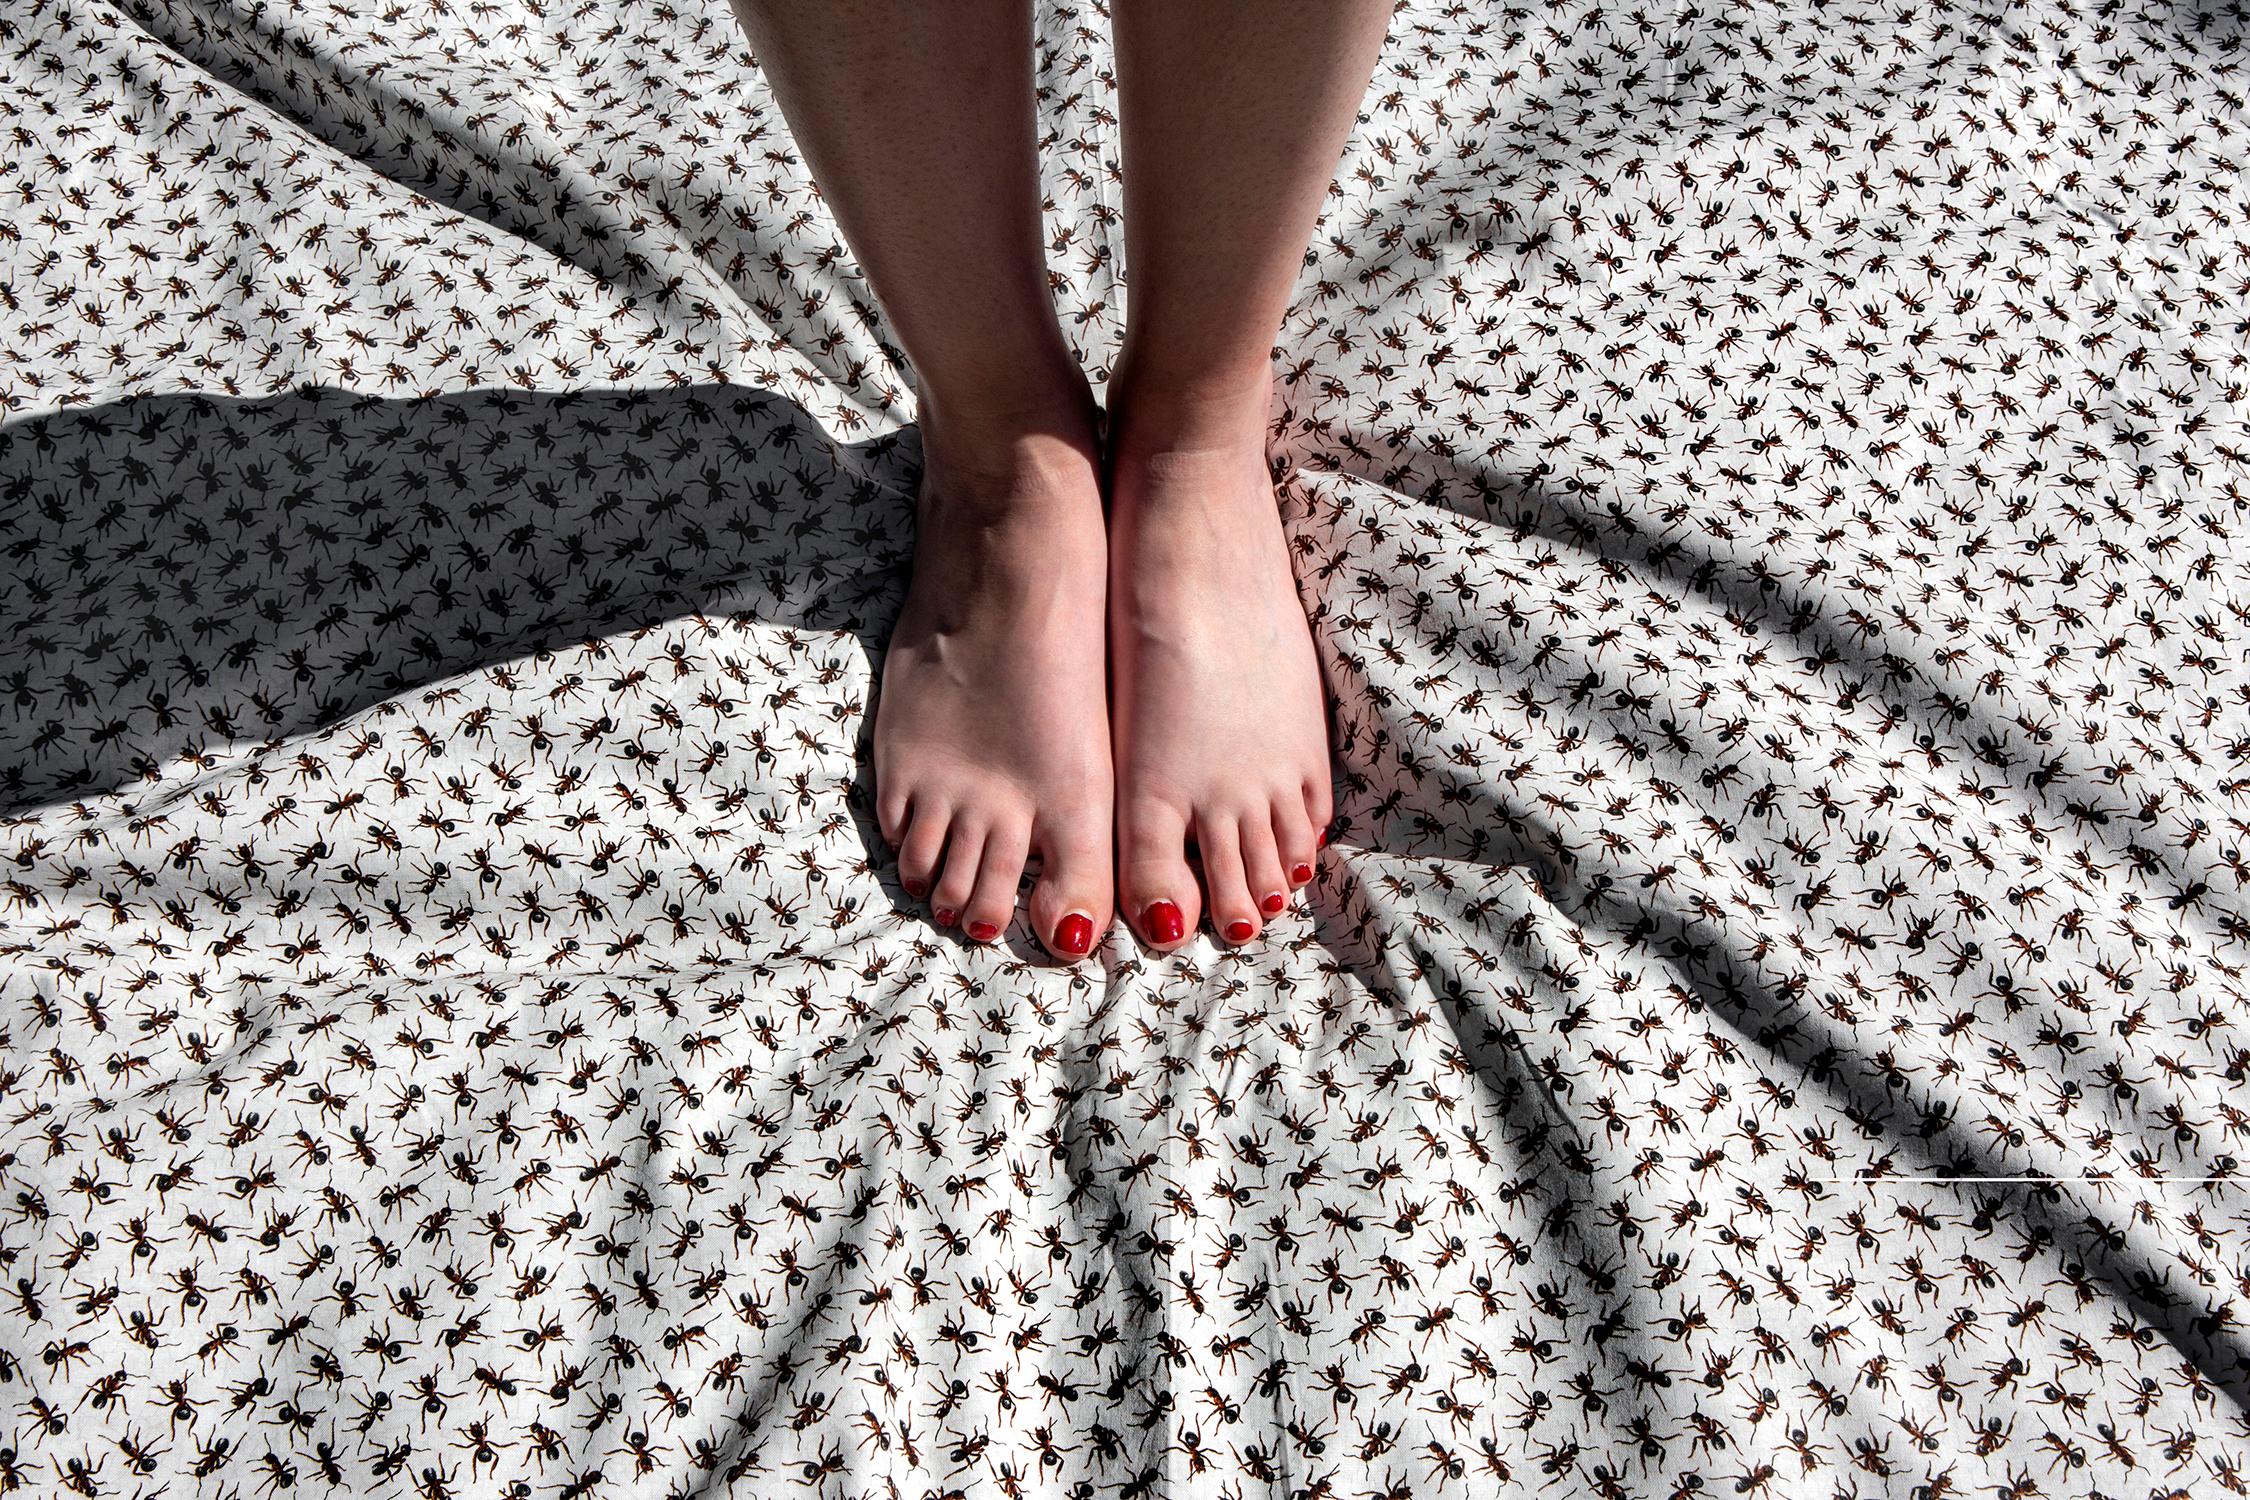 Shannon Davis Color Photograph - "Surrounded" Southern, ants, staged photography, feet, figurative black & white